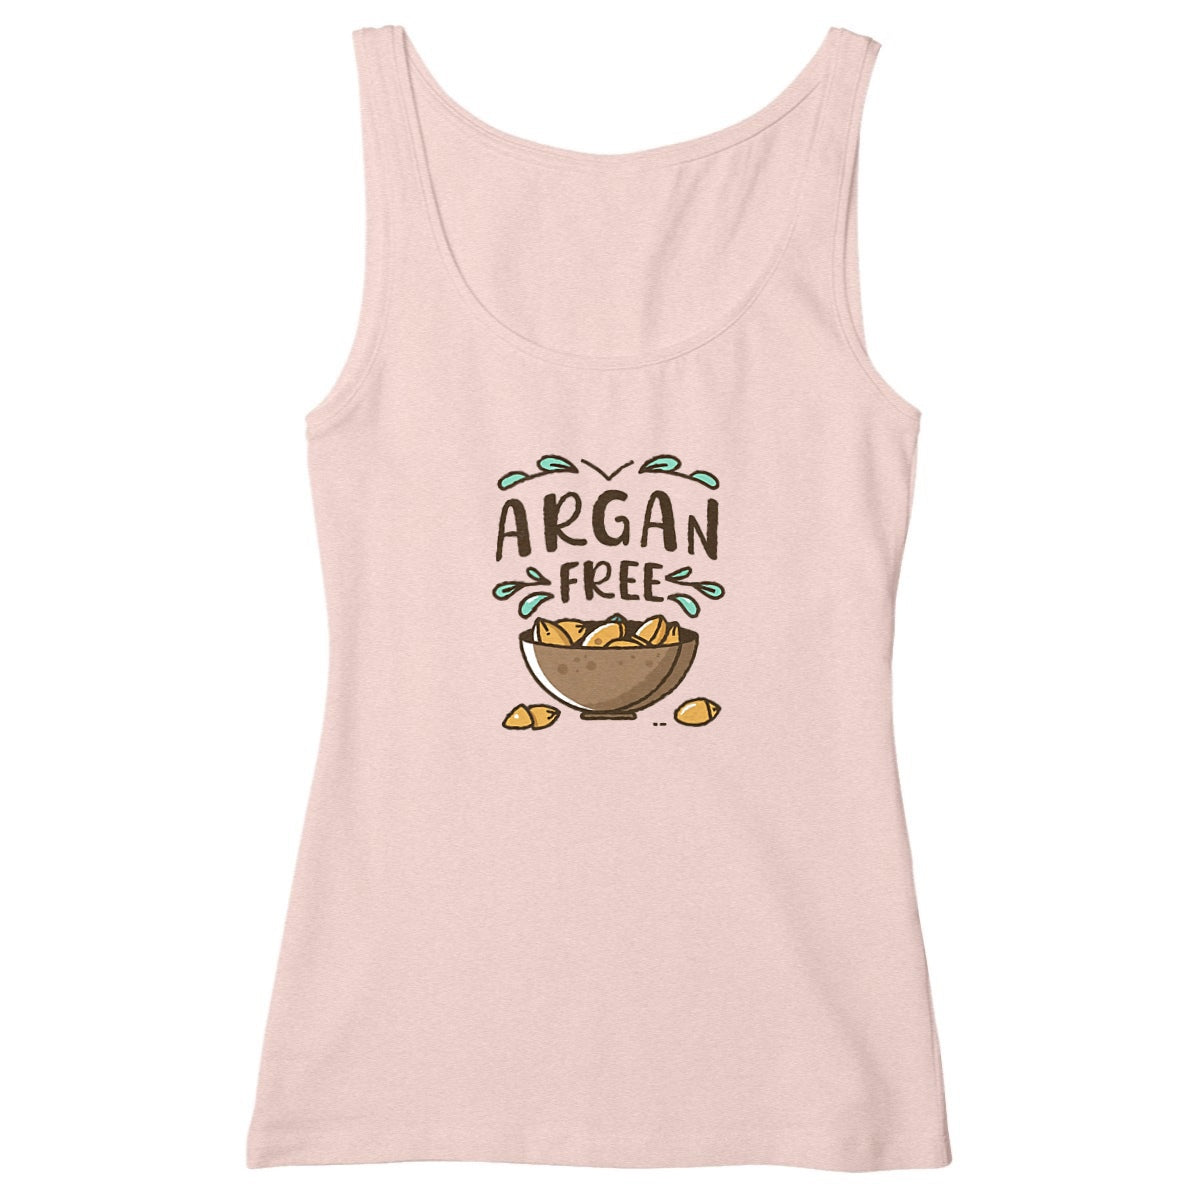 Argan Free Organic Cotton Graphic Tank Top | Hypoallergenic - Allergy Friendly - Naturally Free